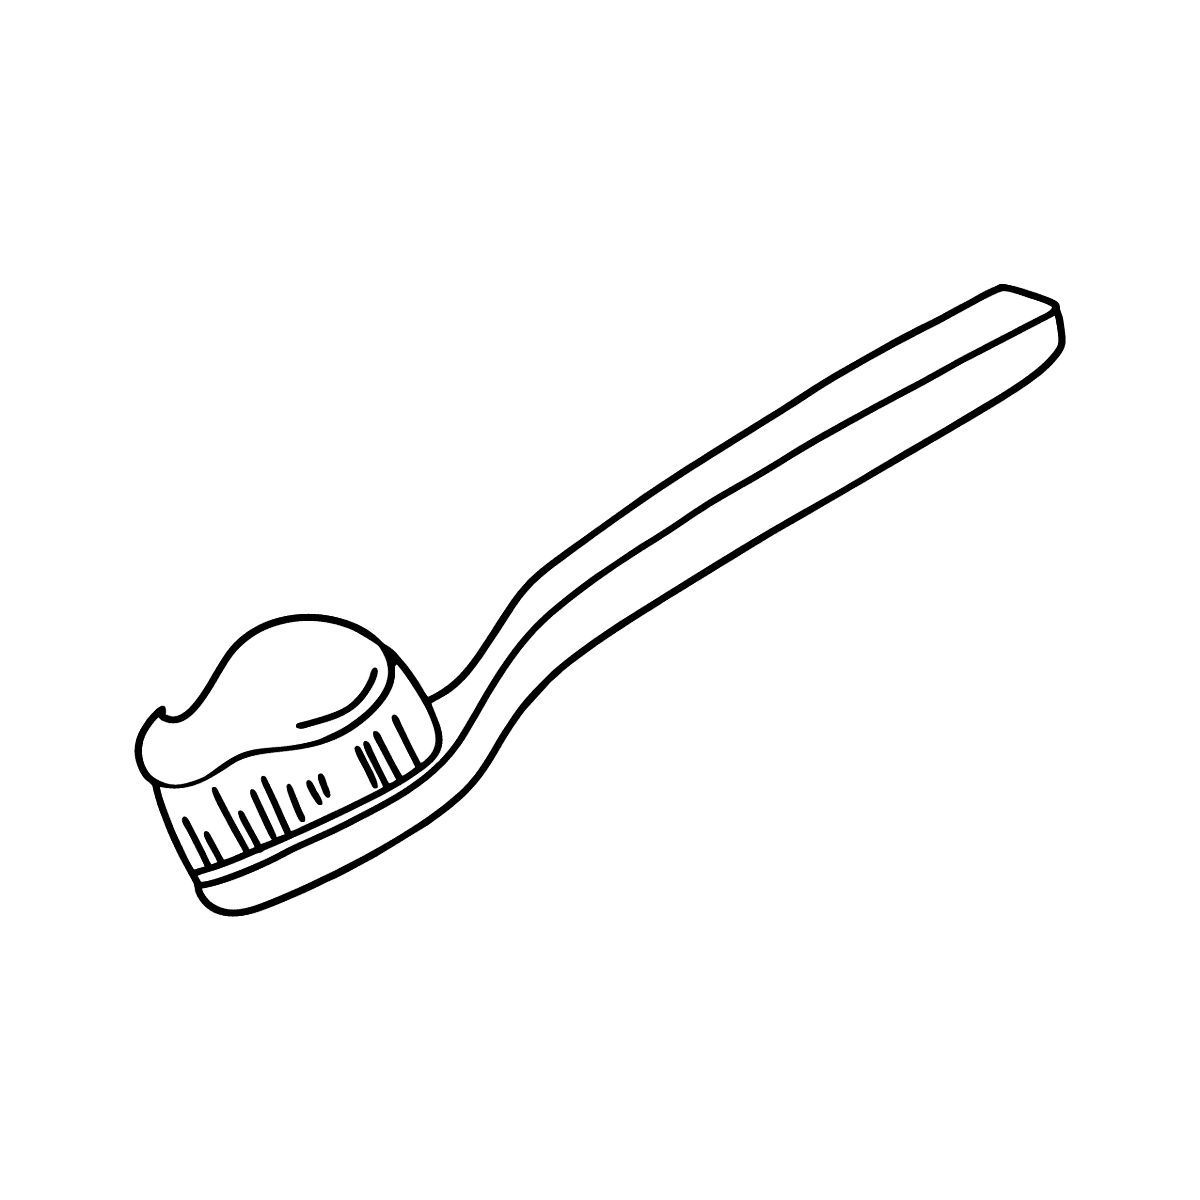 Toothbrush coloring page â for kids online or printable for free